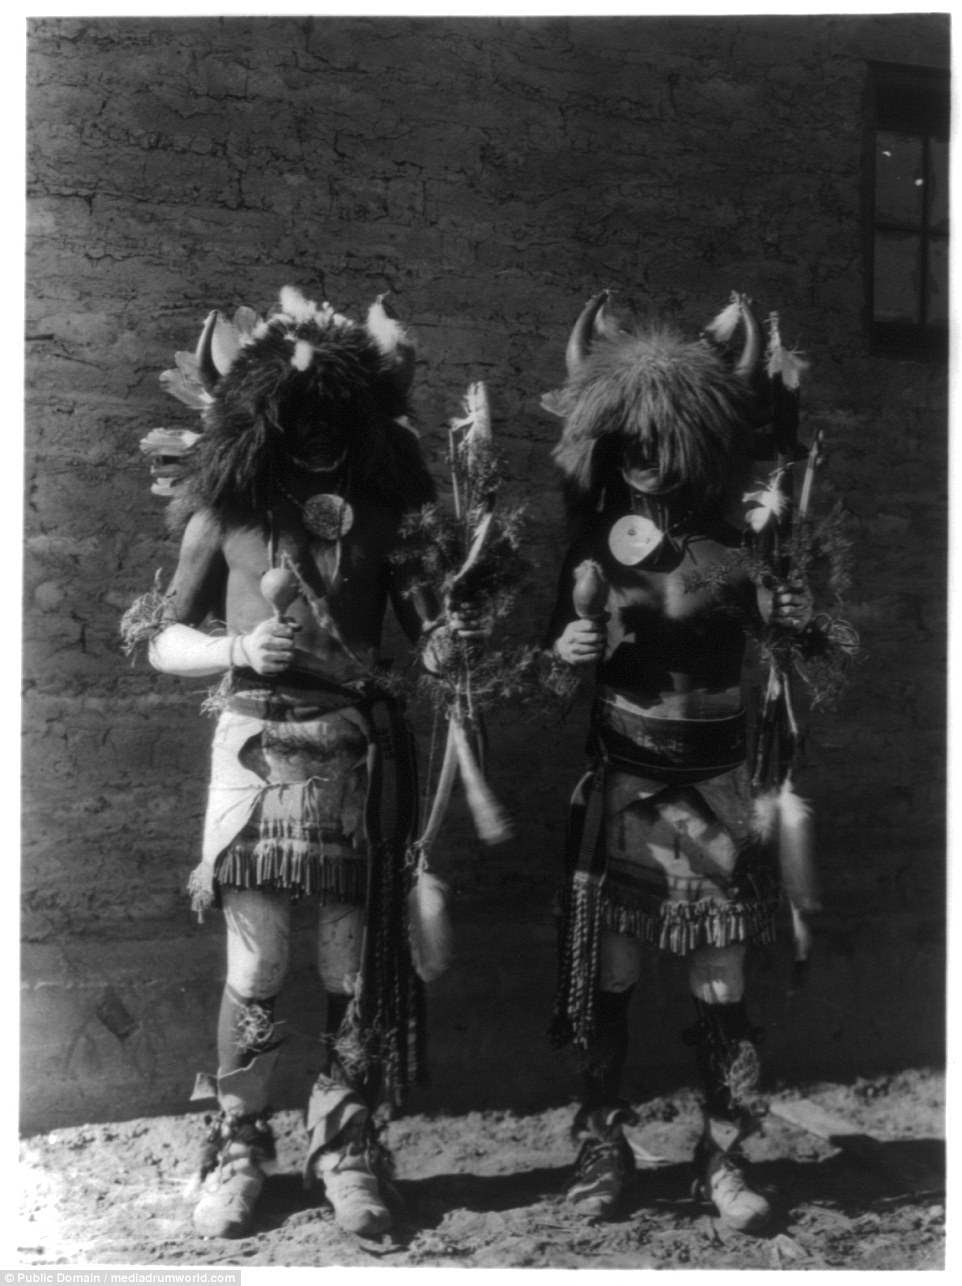 Two Native American men in costumes wearing horns of buffaloes pictured in 1907 